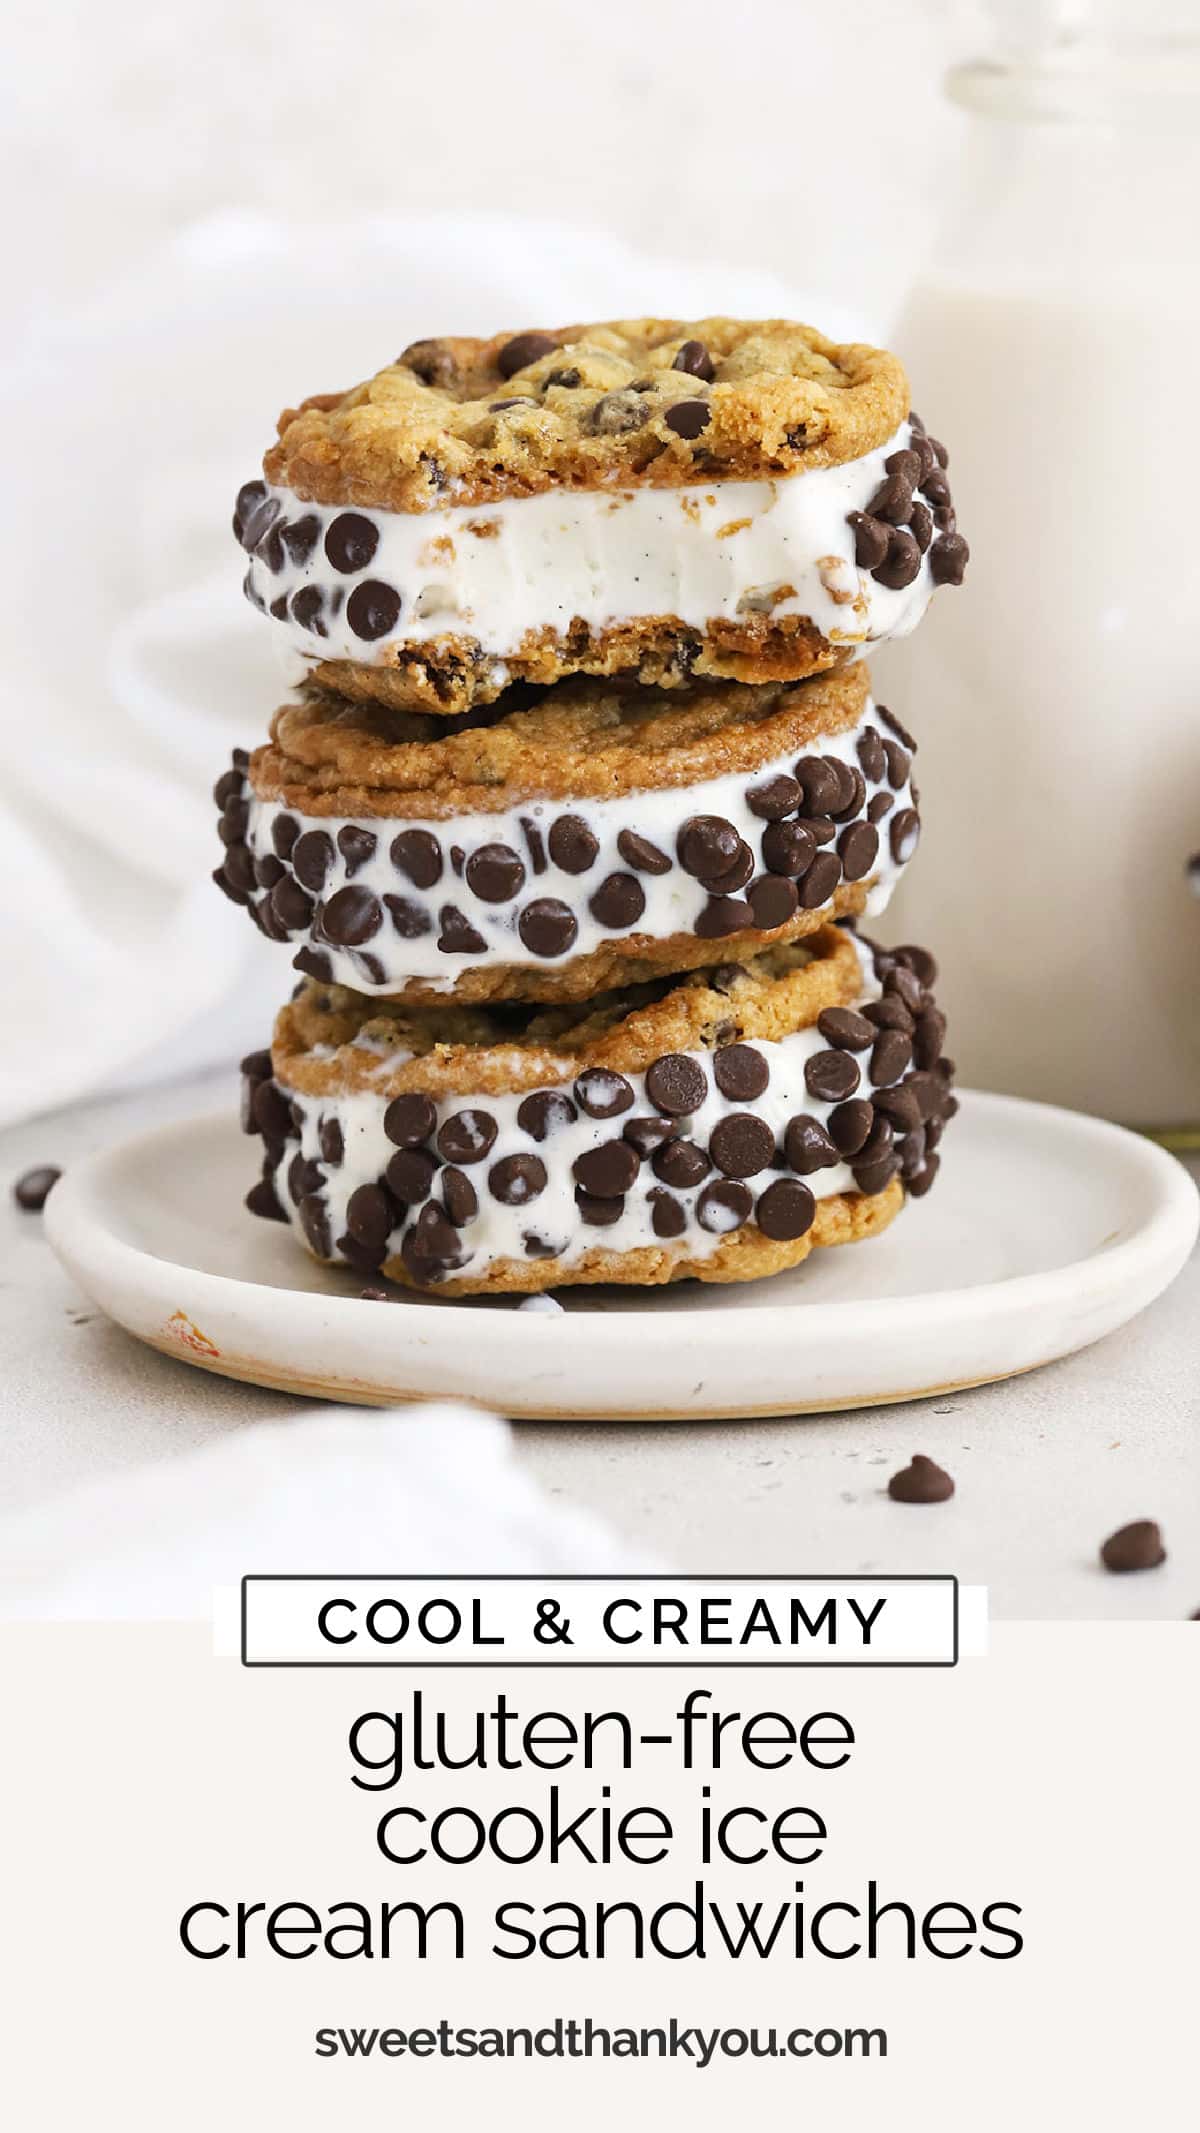 These gluten-free cookie ice cream sandwiches are such a fun dessert to cool off with. Try our classic combination or mix & match ice creams and toppings to create your own! / gluten free chipwich recipe / gluten-free cookie ice cream sandwich recipe / gluten free summer dessert / gluten free ice cream dessert recipe / gluten free ice cream sandwiches with cookies / gluten-free chocolate chip cookie ice cream sandwiches / 